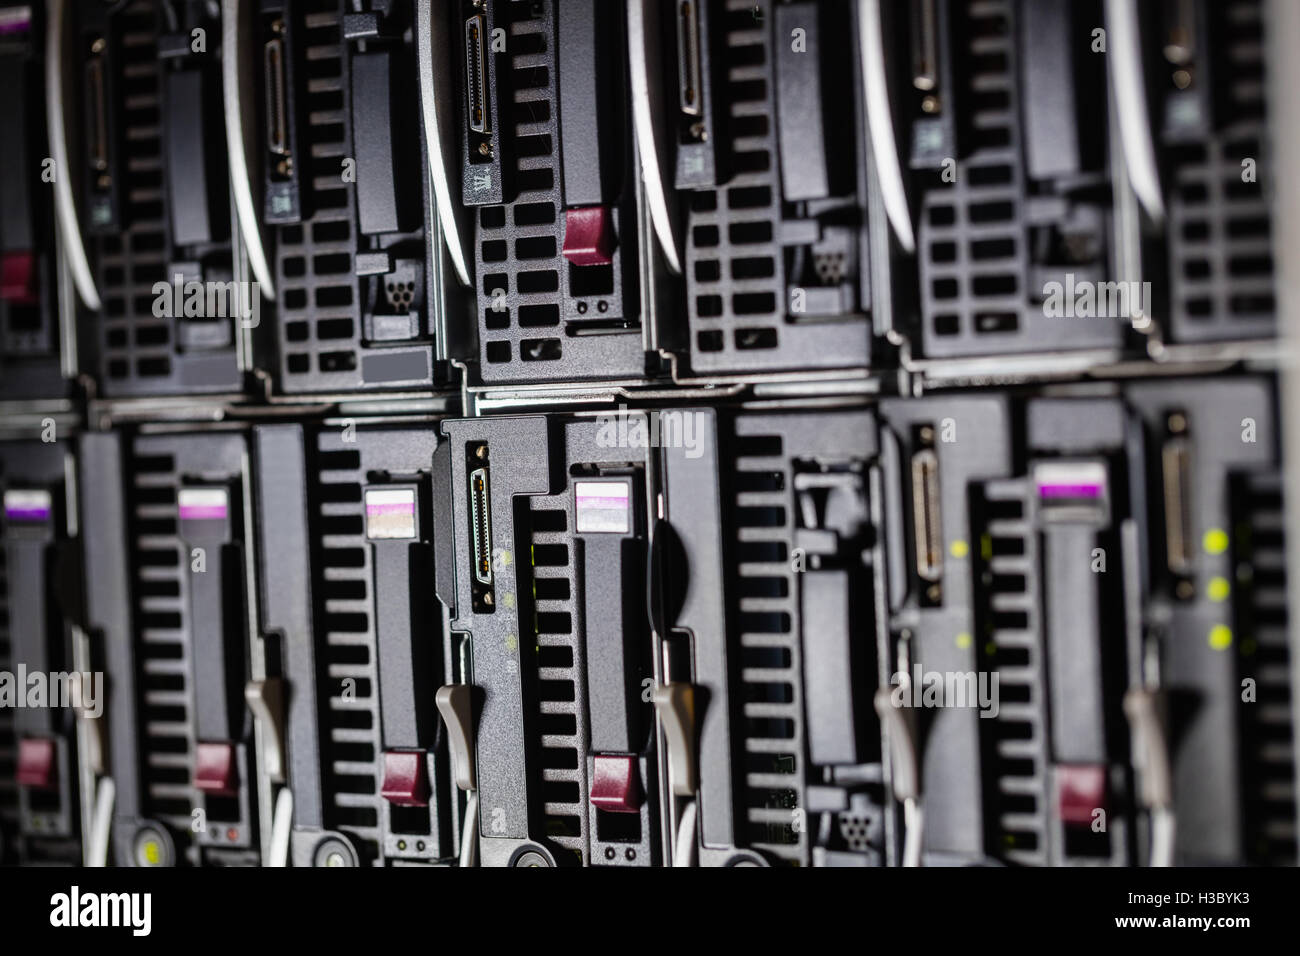 Towers in server room Stock Photo